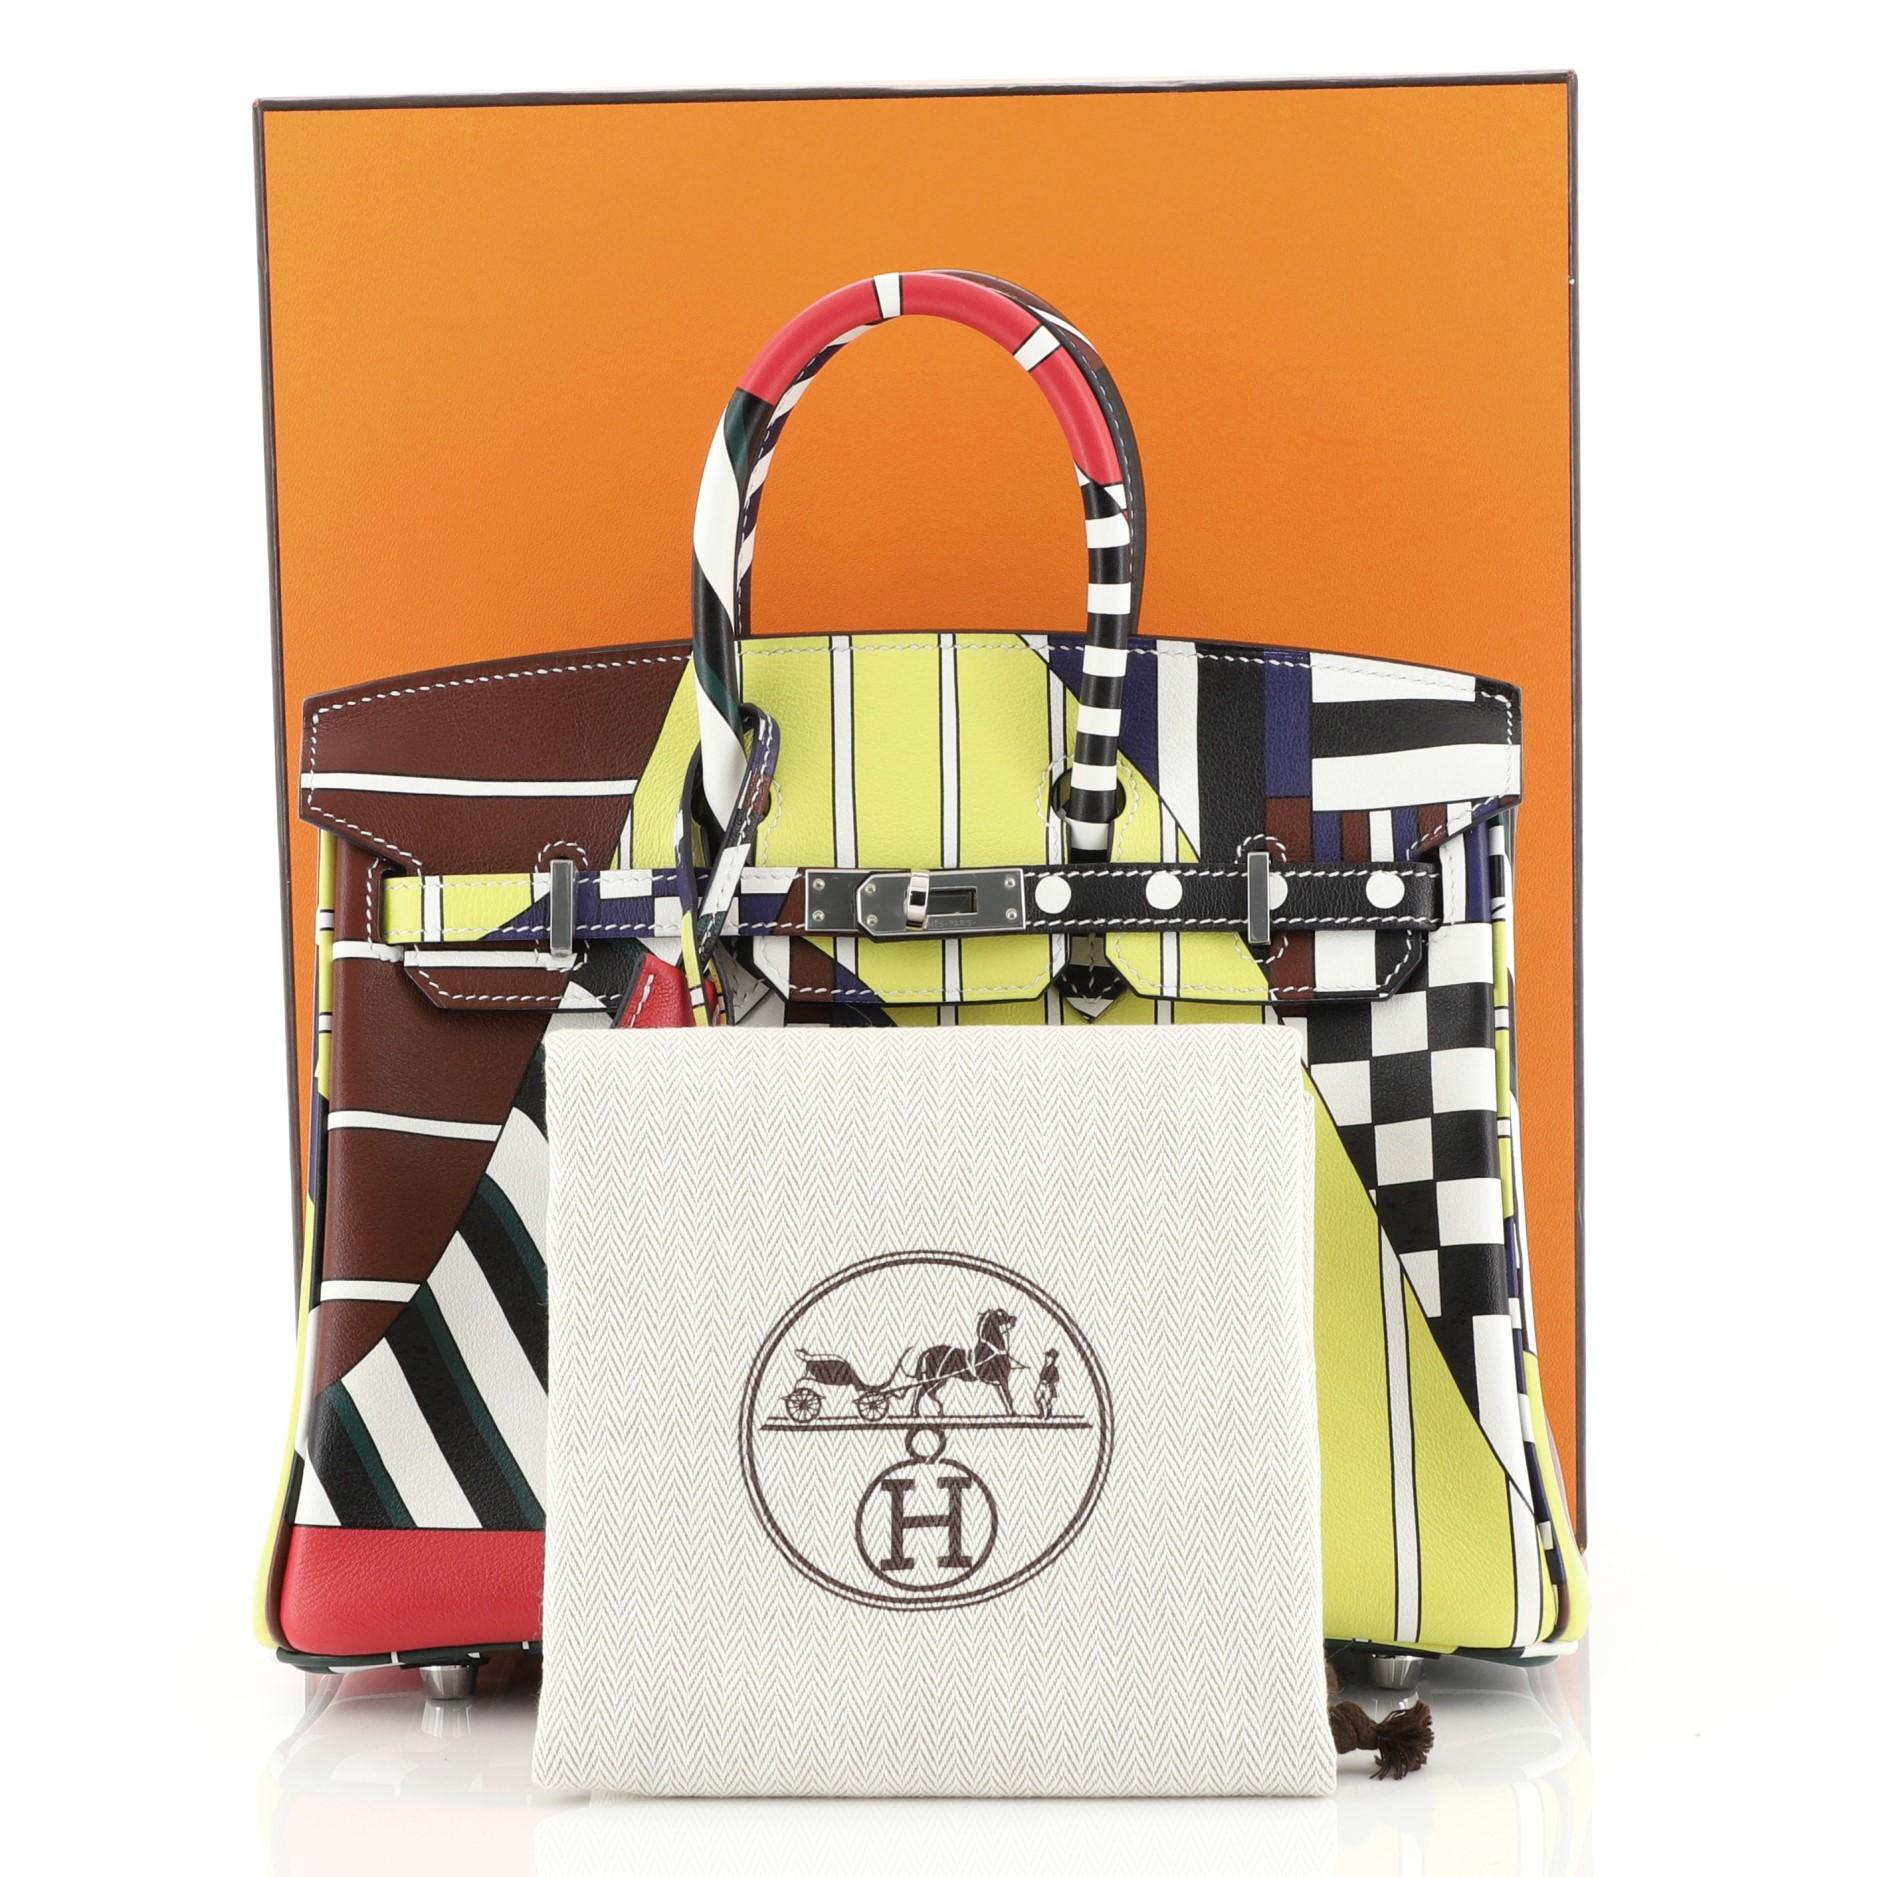 This Hermes One Two Three and Away We Go Birkin Bag Limited Edition Printed Swift 25, crafted in Multicolor printed Swift leather, features dual rolled handles, printed abstract sailboat and palladium hardware. Its turn-lock closure opens to a Bleu